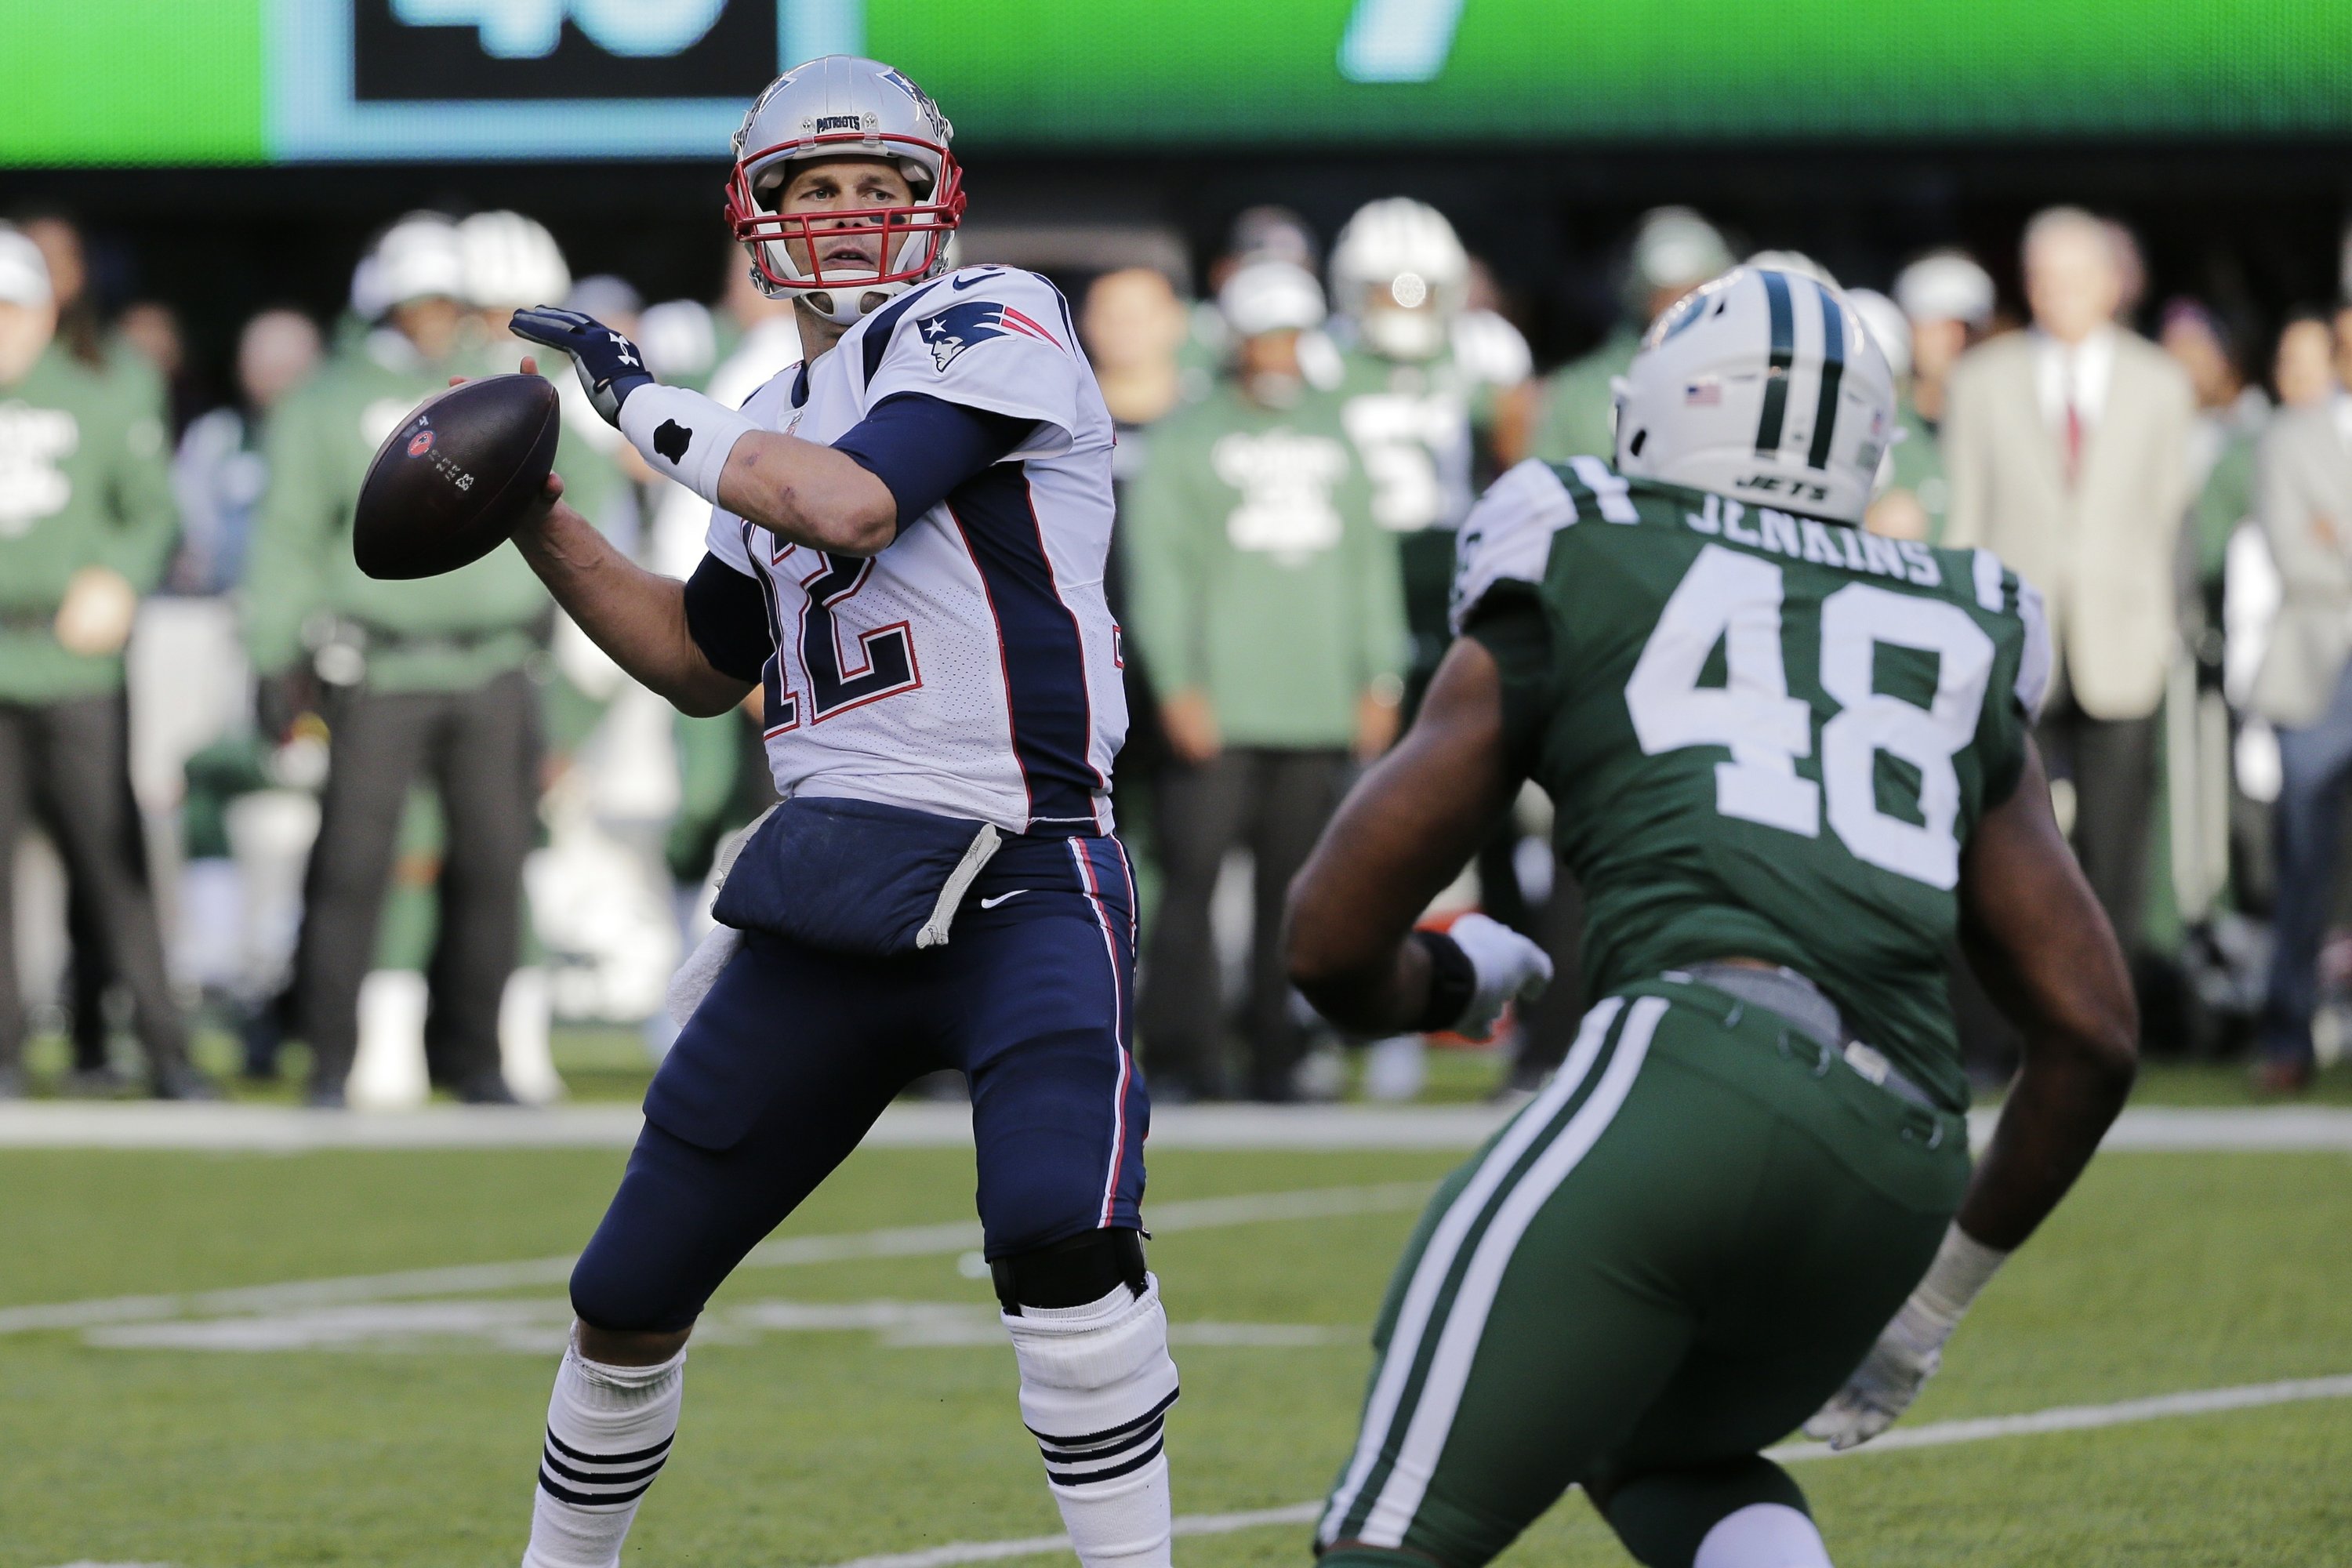 Brady new NFL leader in yards passing, Pats top Jets 2713 AP News